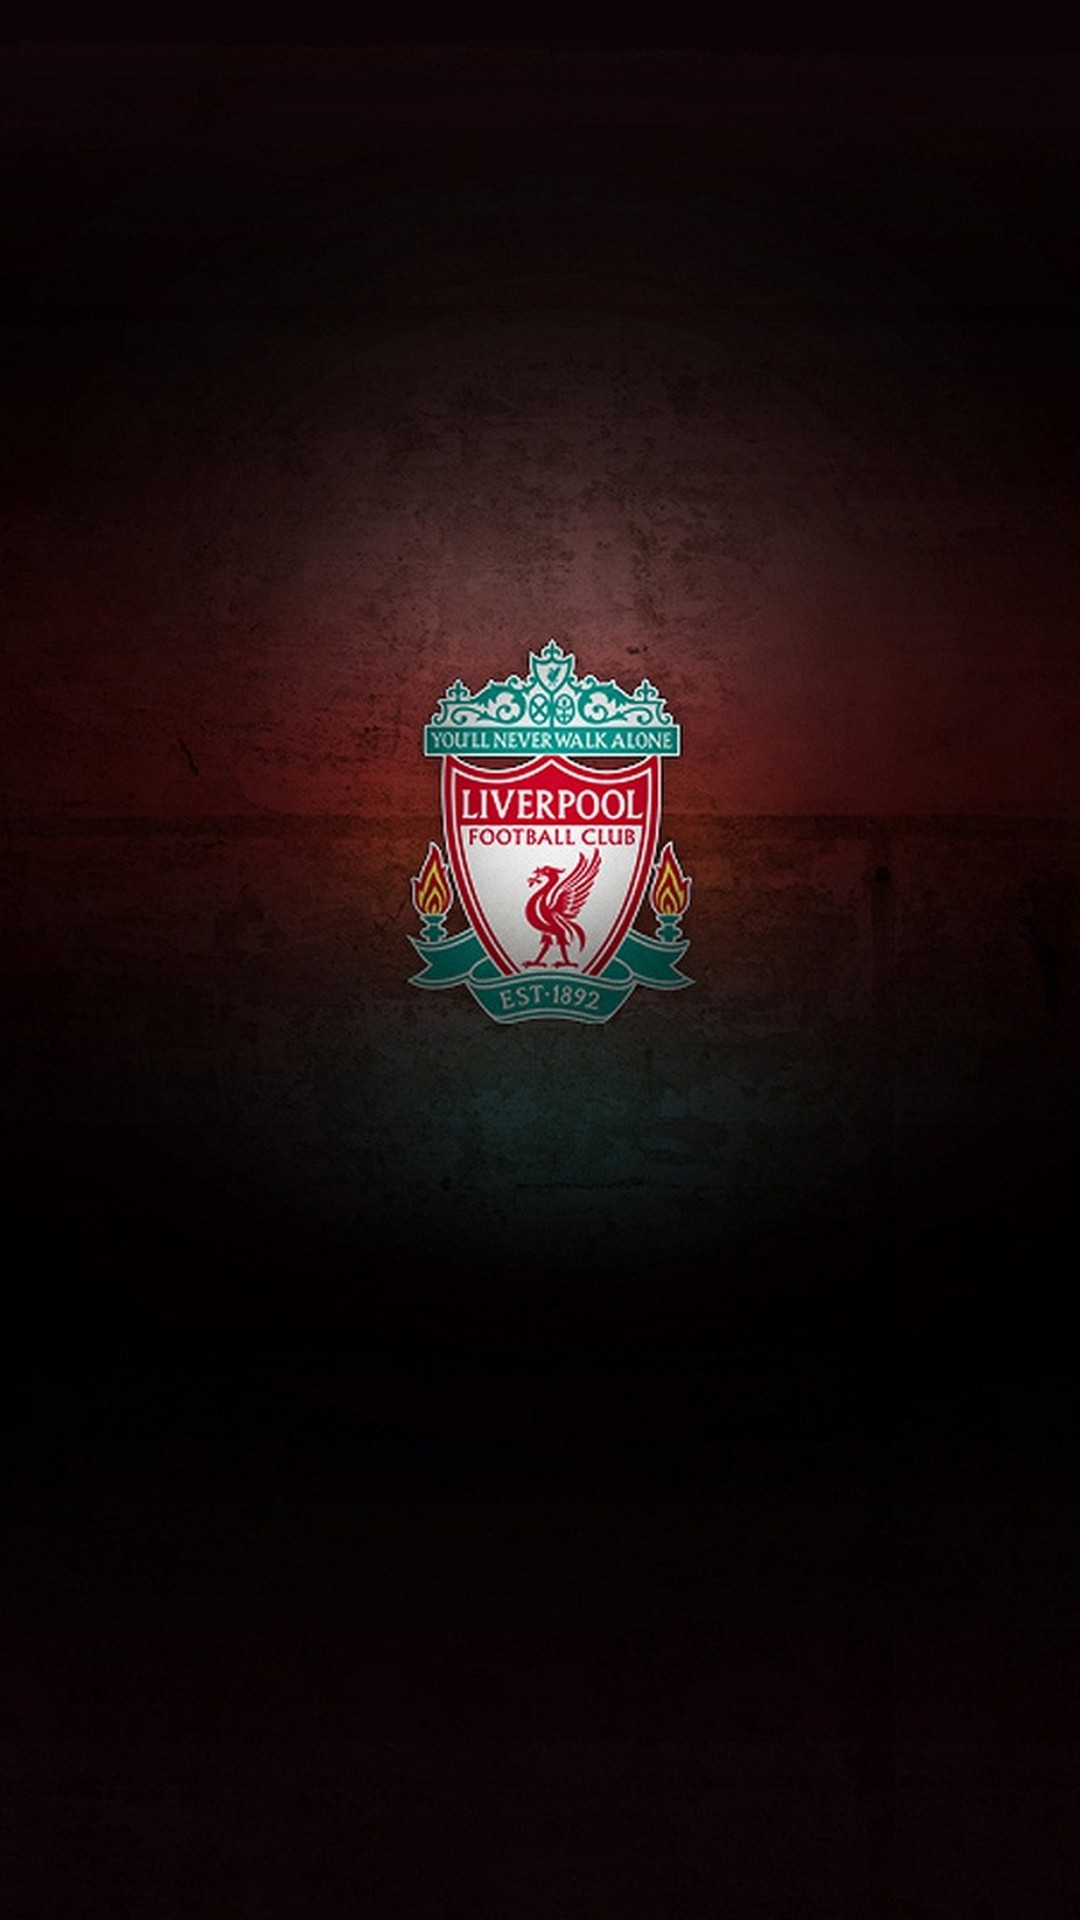 Liverpool iPhone 6 Wallpaper HD with high-resolution 1080x1920 pixel. Download all Mobile Wallpapers and Use them as wallpapers for your iPhone, Tablet, iPad, Android and other mobile devices